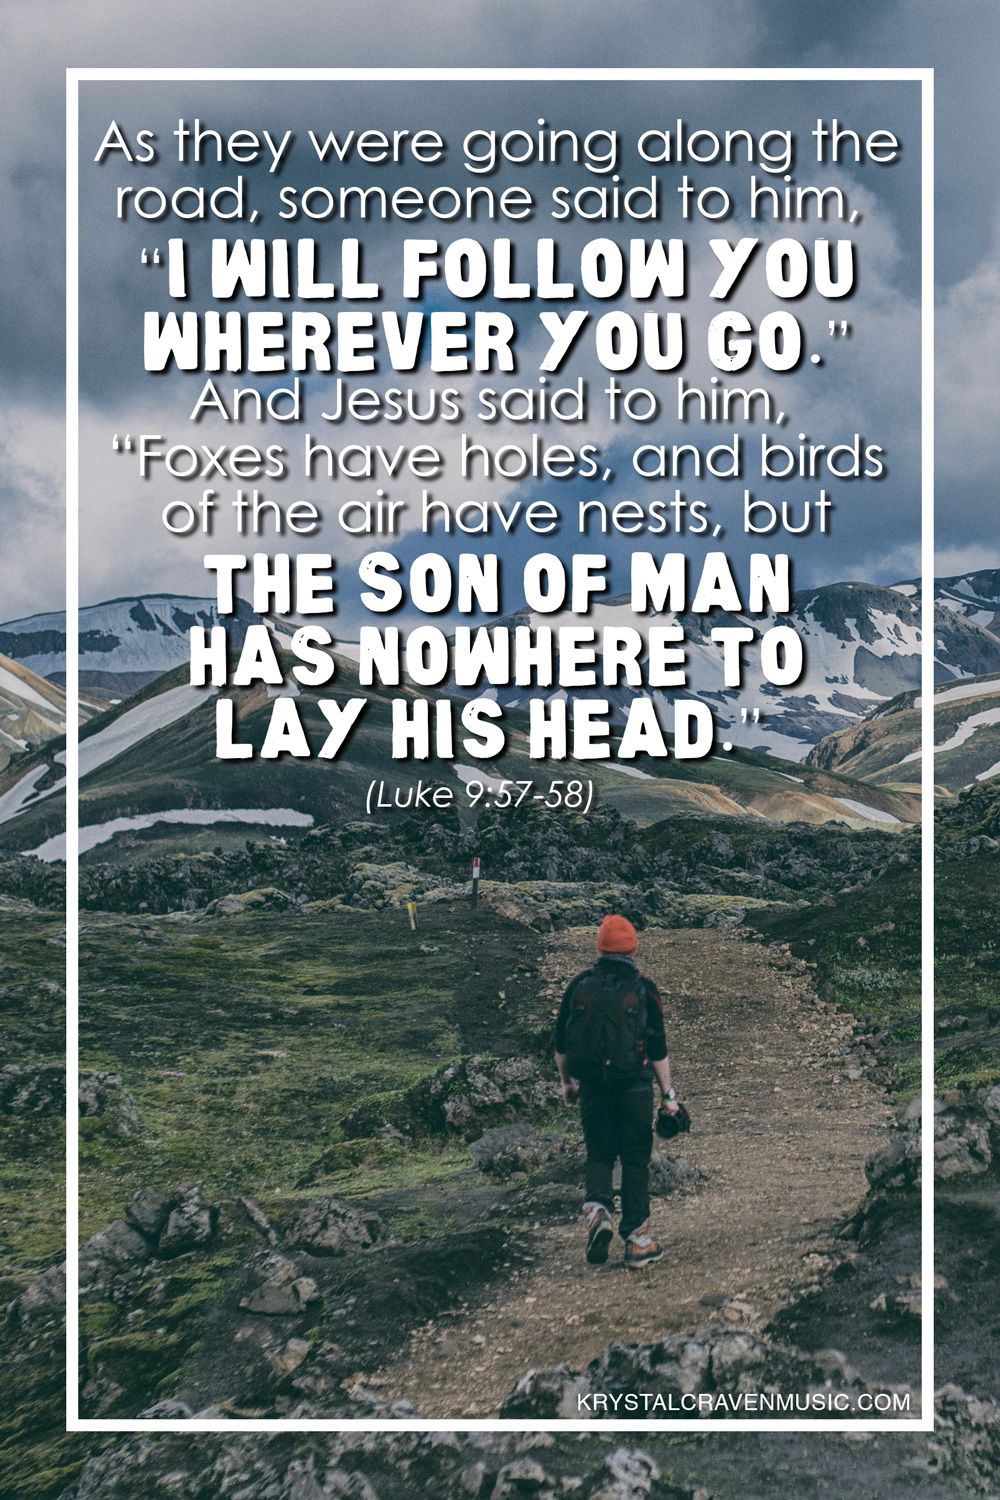 The Bible verse text from Luke 9:57-58, "As they were going along the road, someone said to him, “I will follow you wherever you go.” And Jesus said to him, “Foxes have holes, and birds of the air have nests, but the Son of Man has nowhere to lay his head." This text is overlaying a mountain trail with a hiker walking up the trail away from the camera.